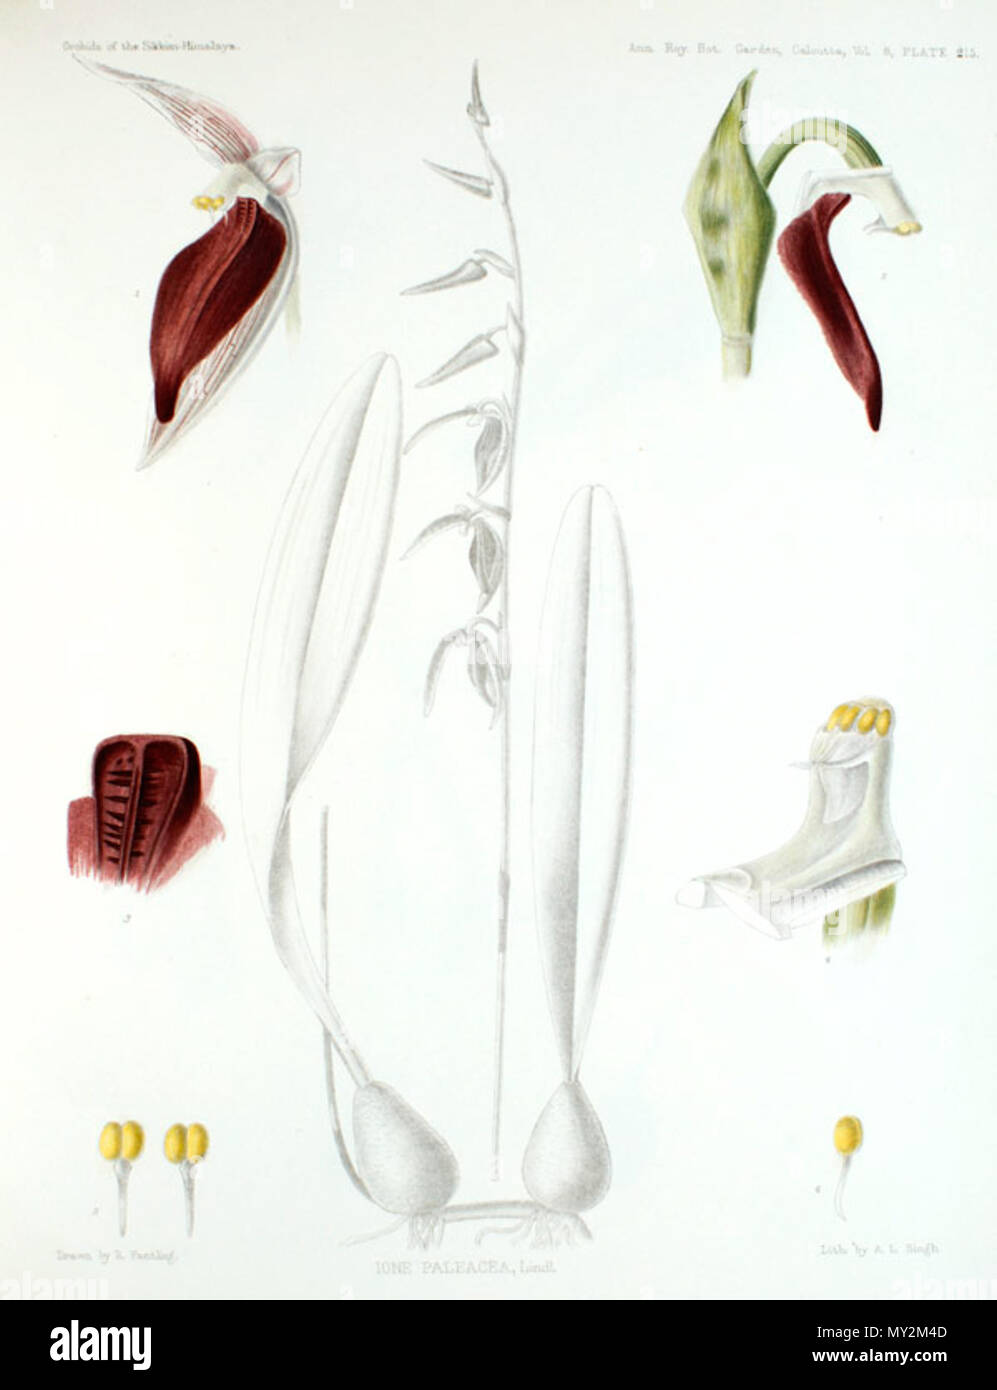 . Illustration of Sunipia cirrhata (as syn. Ione paleacea) . 1898. G. King and R. Pantling 508 Sunipia cirrhata (as Ione paleacea) - The Orchids of the Sikkim-Himalaya pl 215 (1898) Stock Photo